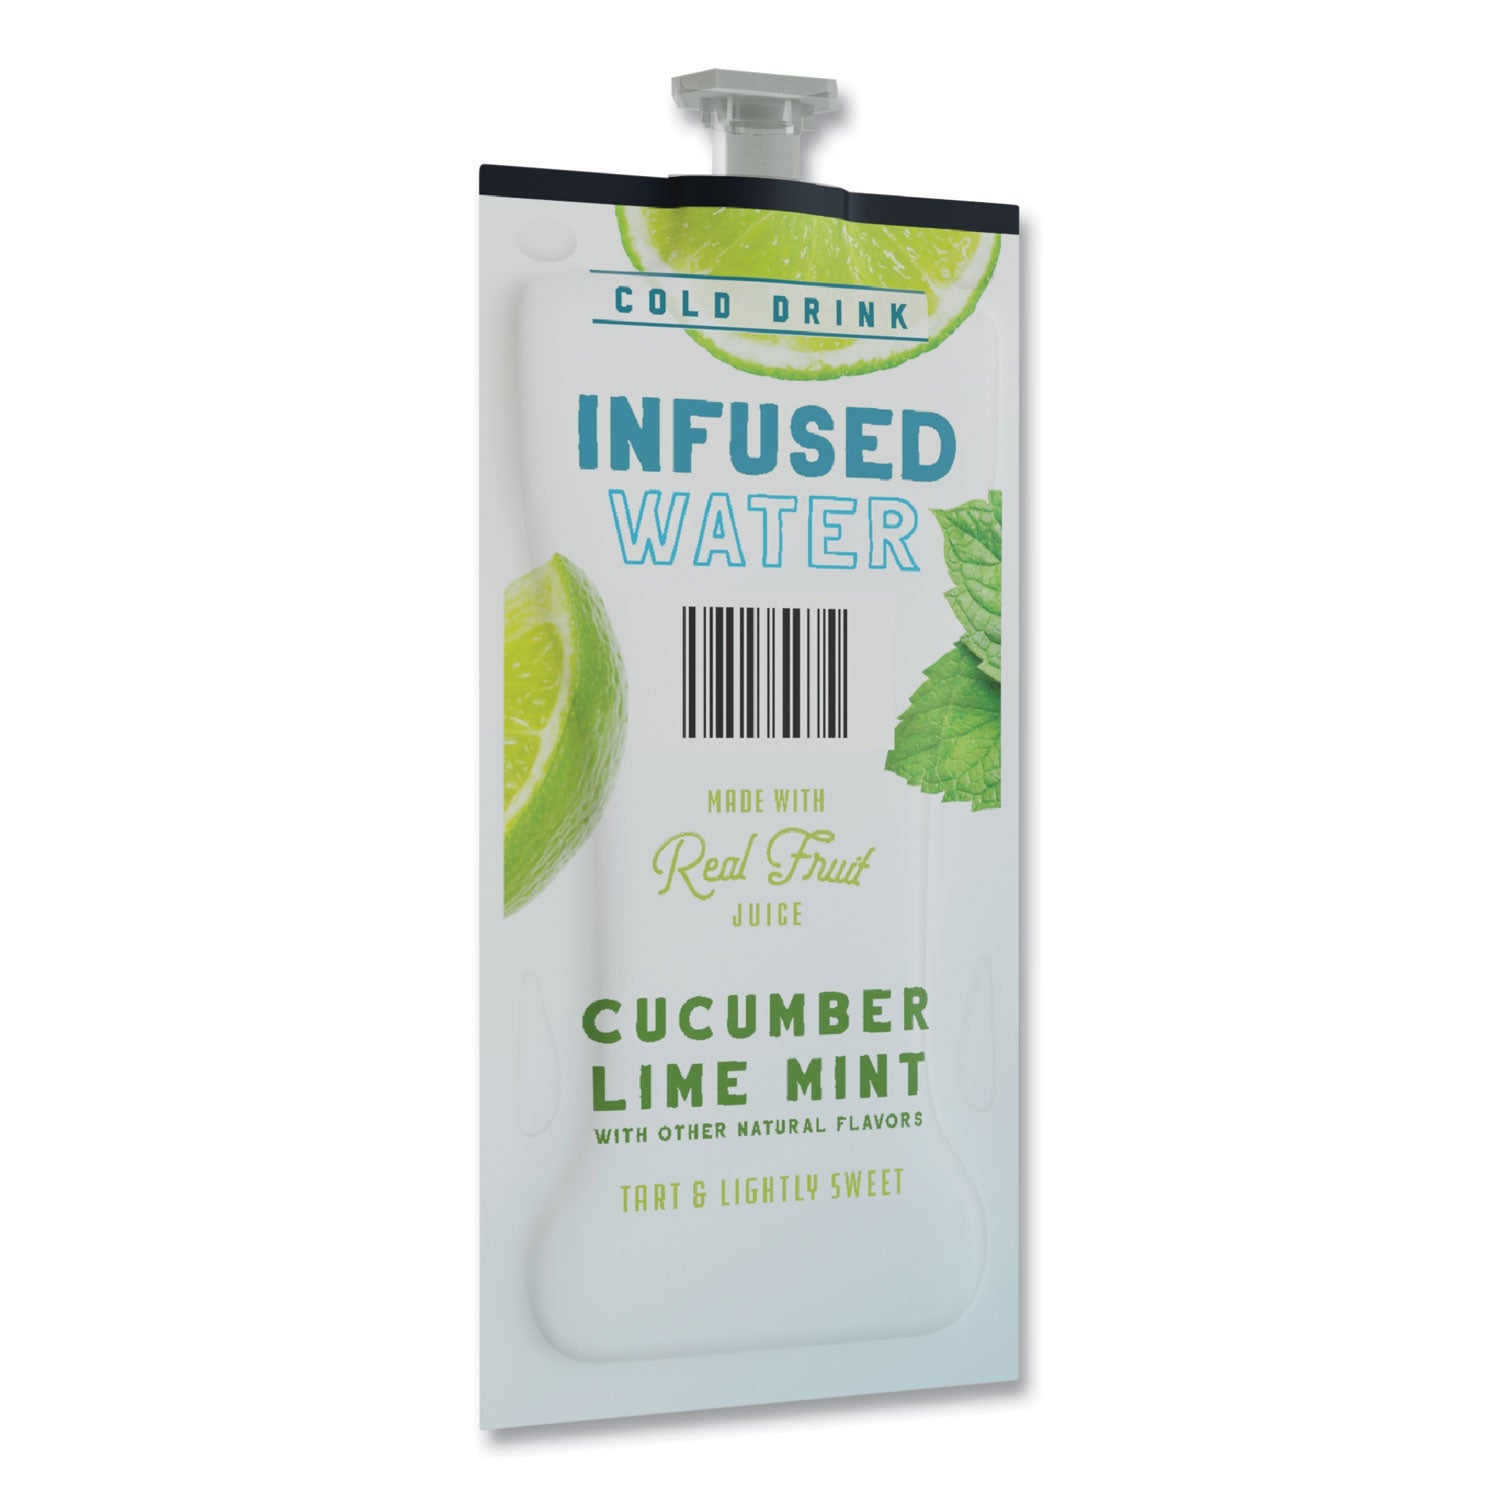 cucumber-lime-mint-infused-water-freshpack-cucumber-lime-mint-008-pouch-100-carton_lav48051 - 2